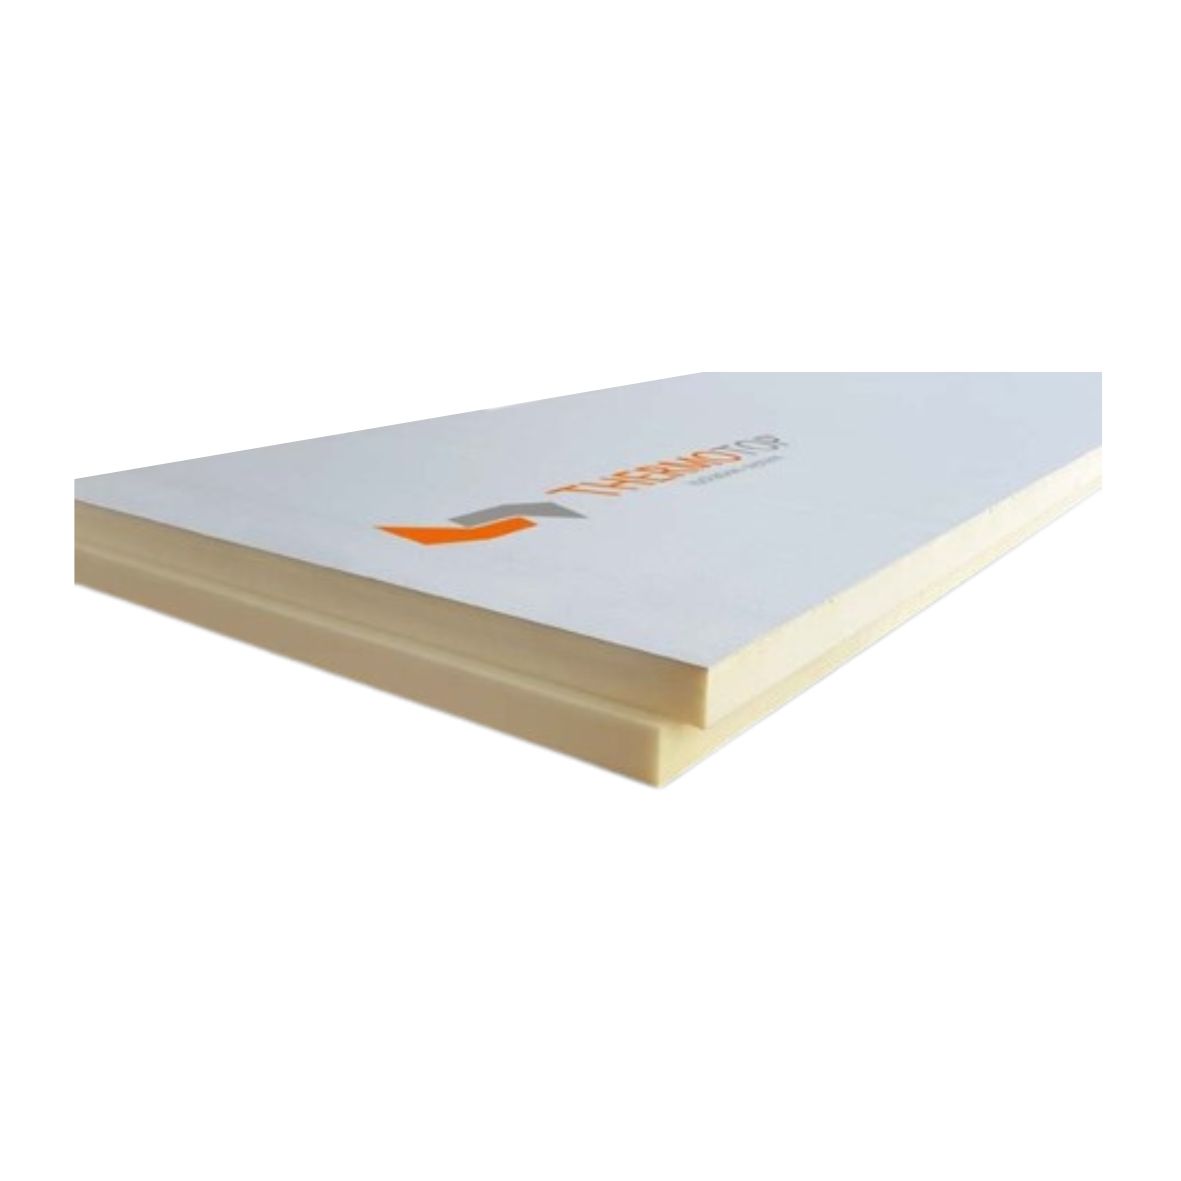 PIR Thermal insulation boards - Thermotop Toboard PIR BV-BV thermal insulation board 40 x 1200 x 2400 mm, https:maxbau.ro